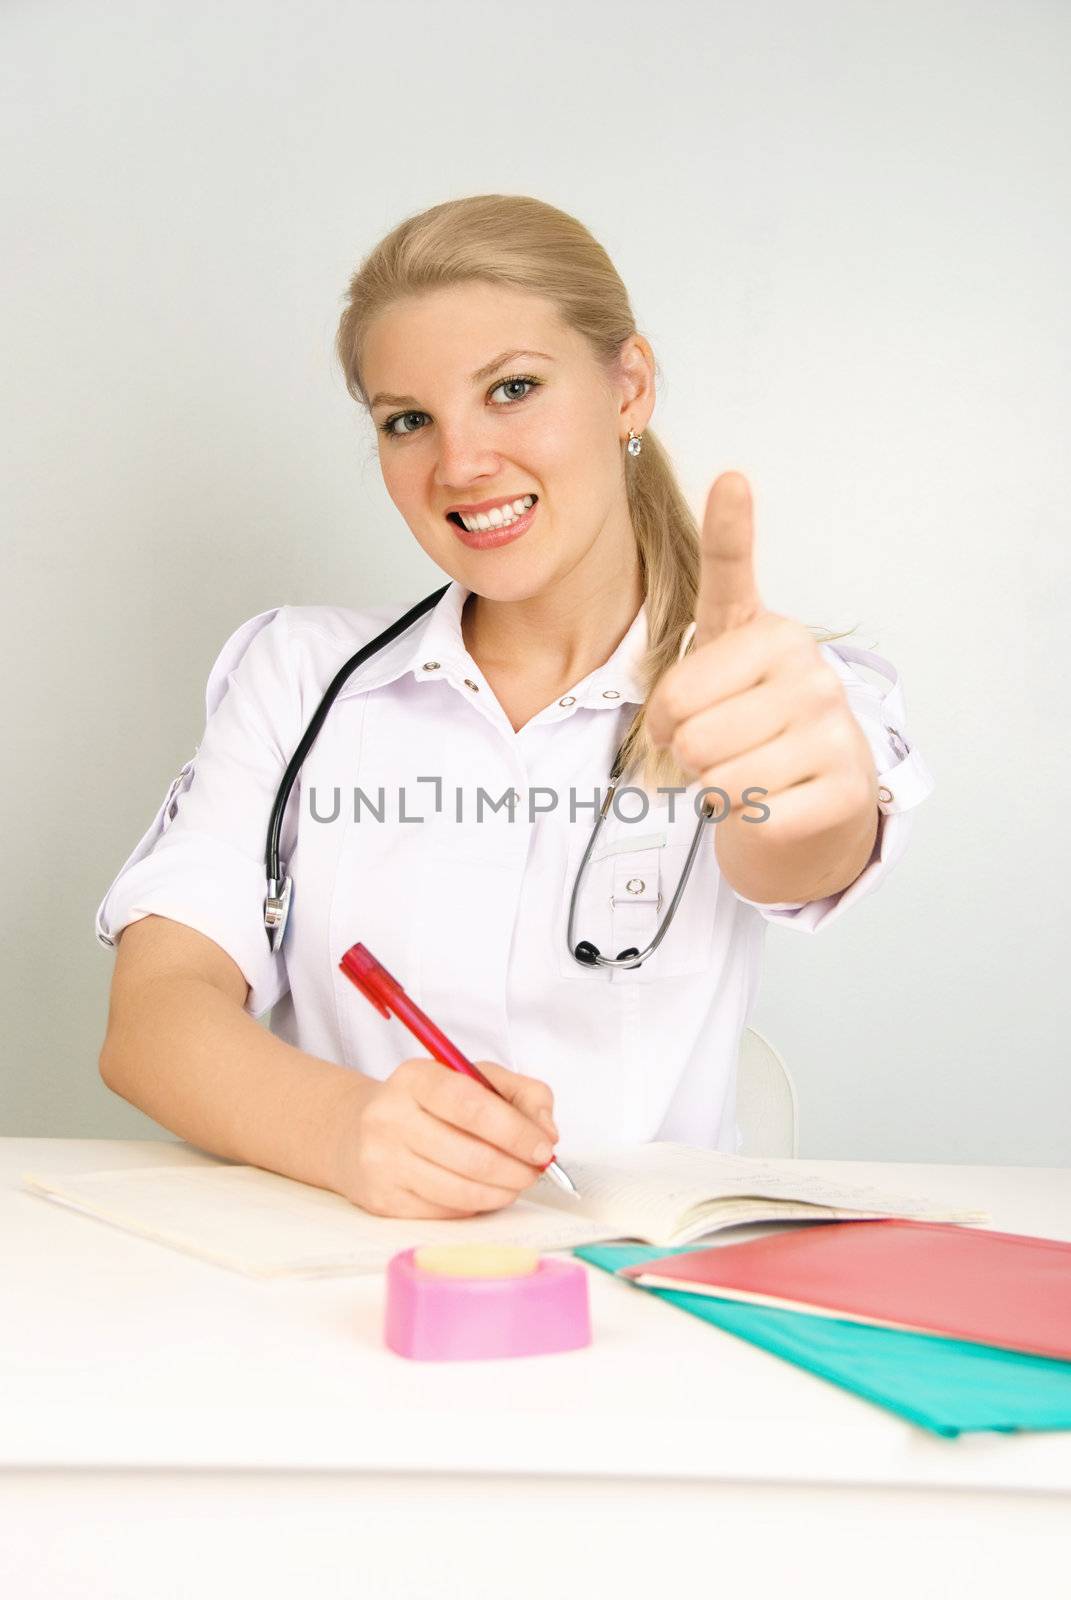 portrait of a young beautiful doctor with her thumb up